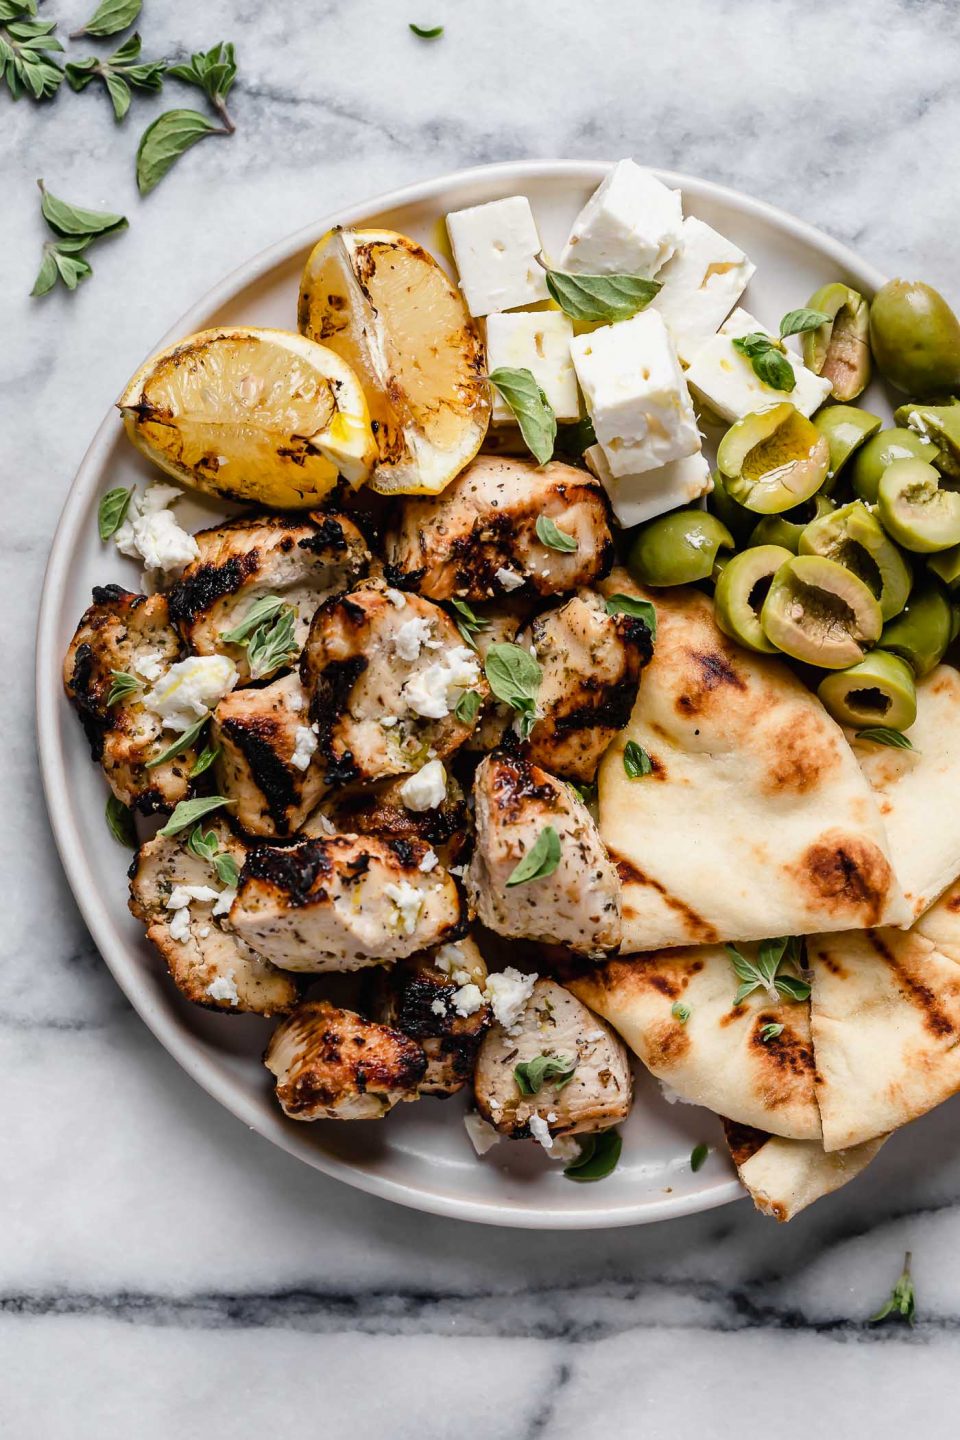 Diced grilled Greek chicken served on a mezze plate with grilled lemon, pita, olives, and cubed feta cheese.